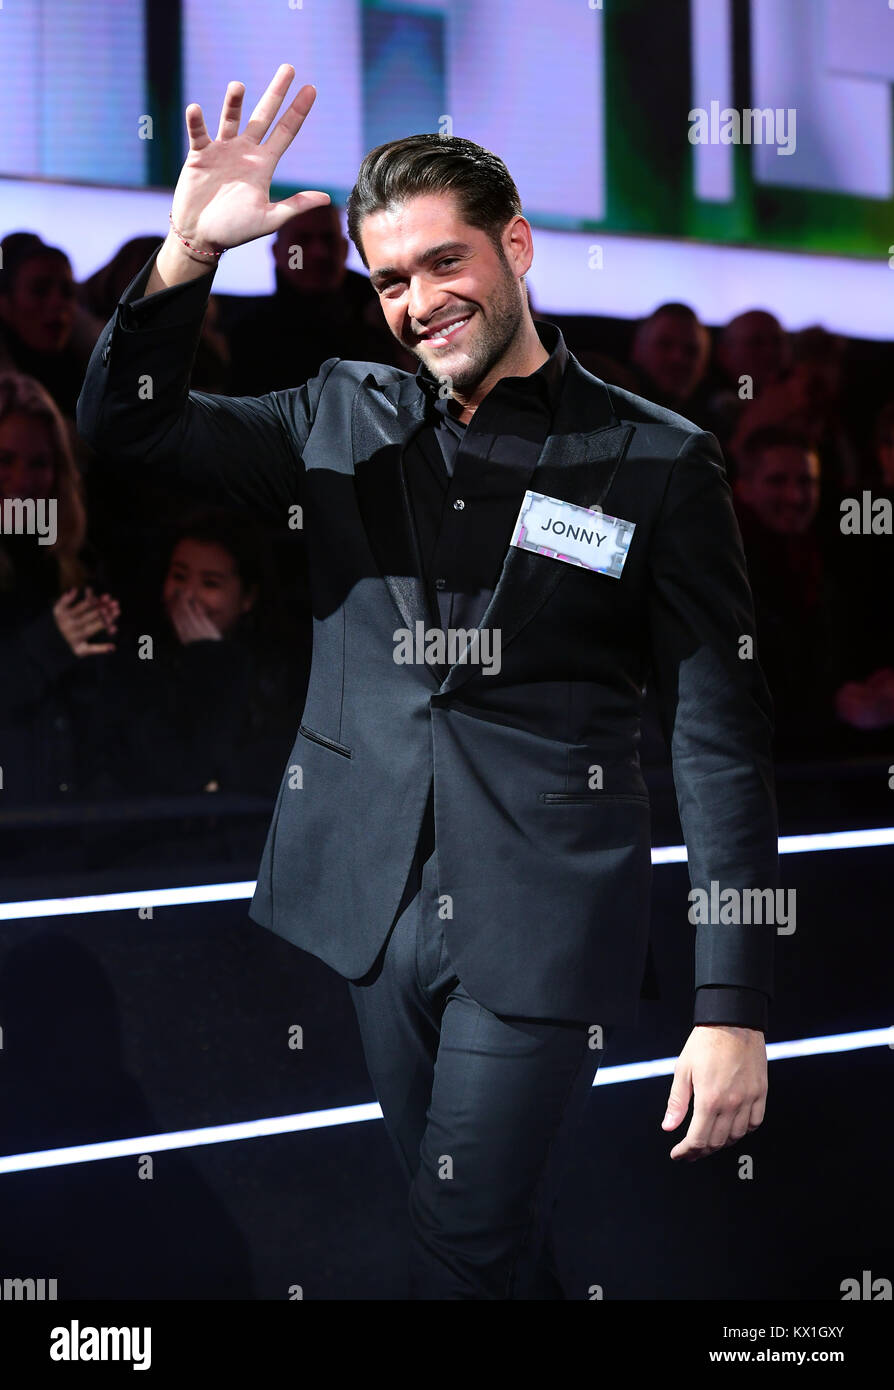 London, UK. 05th Jan, 2018. Jonny Mitchell enters the house during the Celebrity Big Brother Men's Launch held at Elstree Studios in Borehamwood, Hertfordshire. PRESS ASSOCIATION Photo. Picture date: Friday January 5, 2018. See PA story SHOWBIZ CBB Housemates. Photo credit should read: Ian West/PA Wire Credit: Gtres Información más Comuniación on line, S.L./Alamy Live News Stock Photo